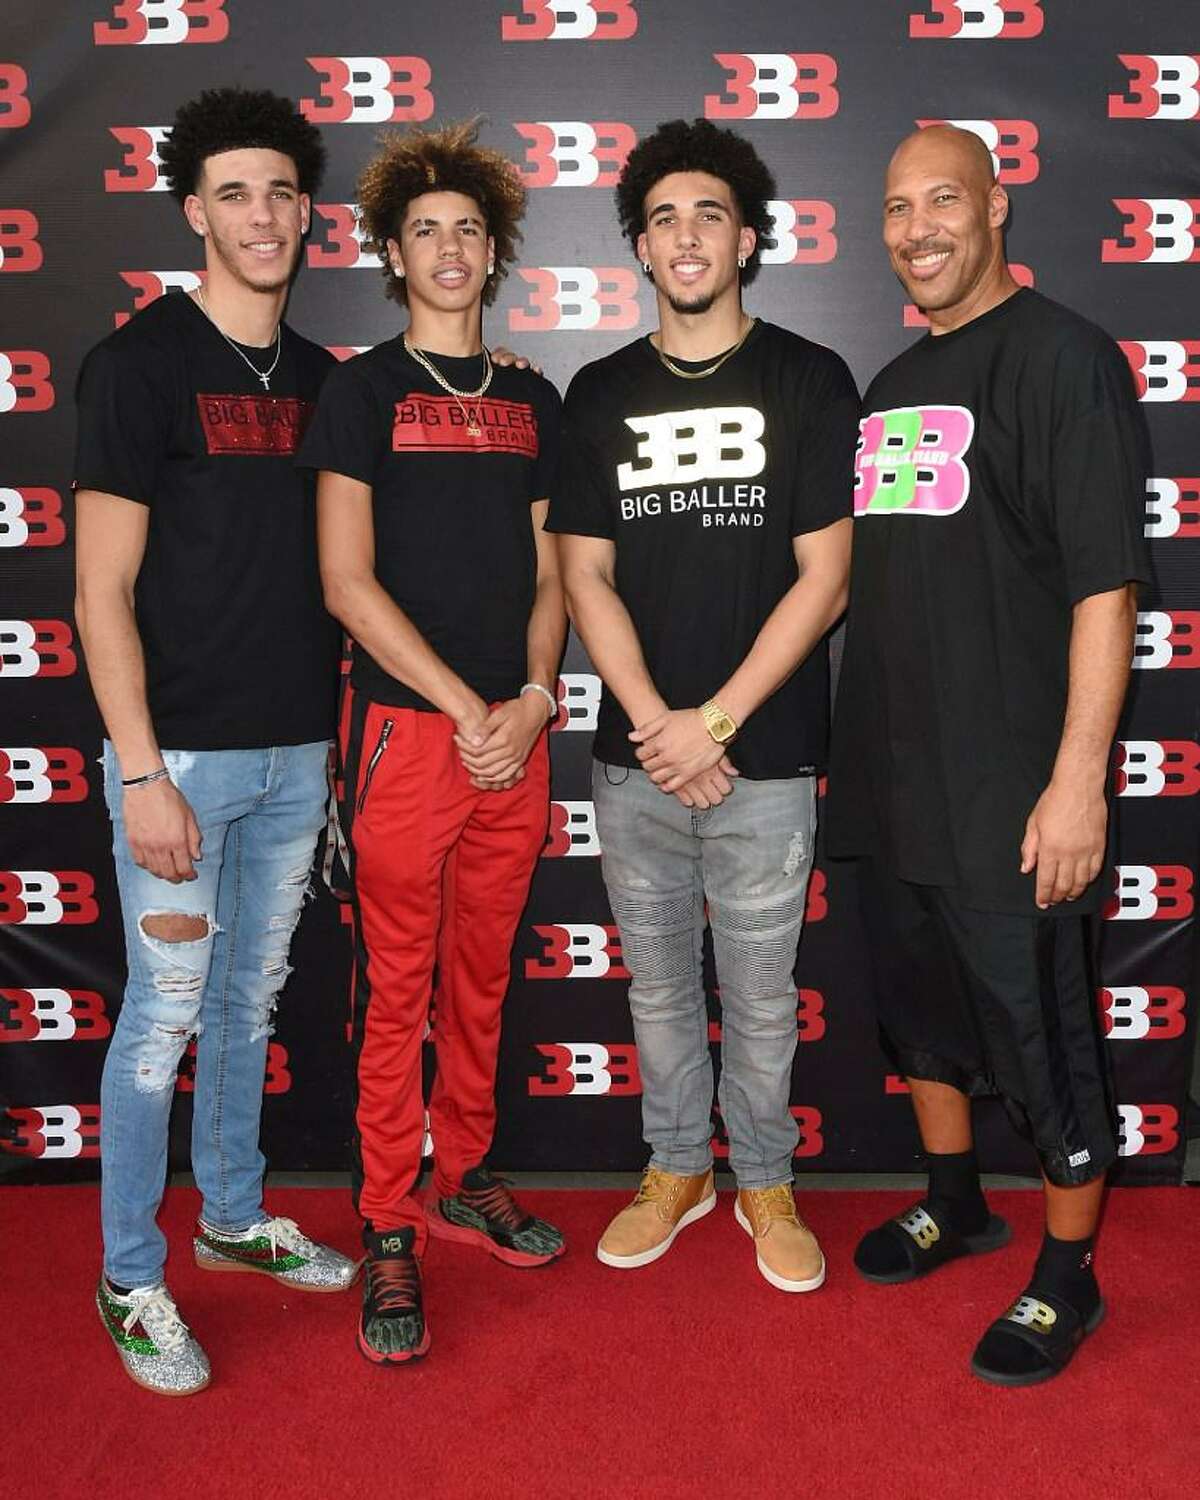 LaVar Ball vs. Michael Jordan: LaMelo Ball says 'we know how it'd turn out